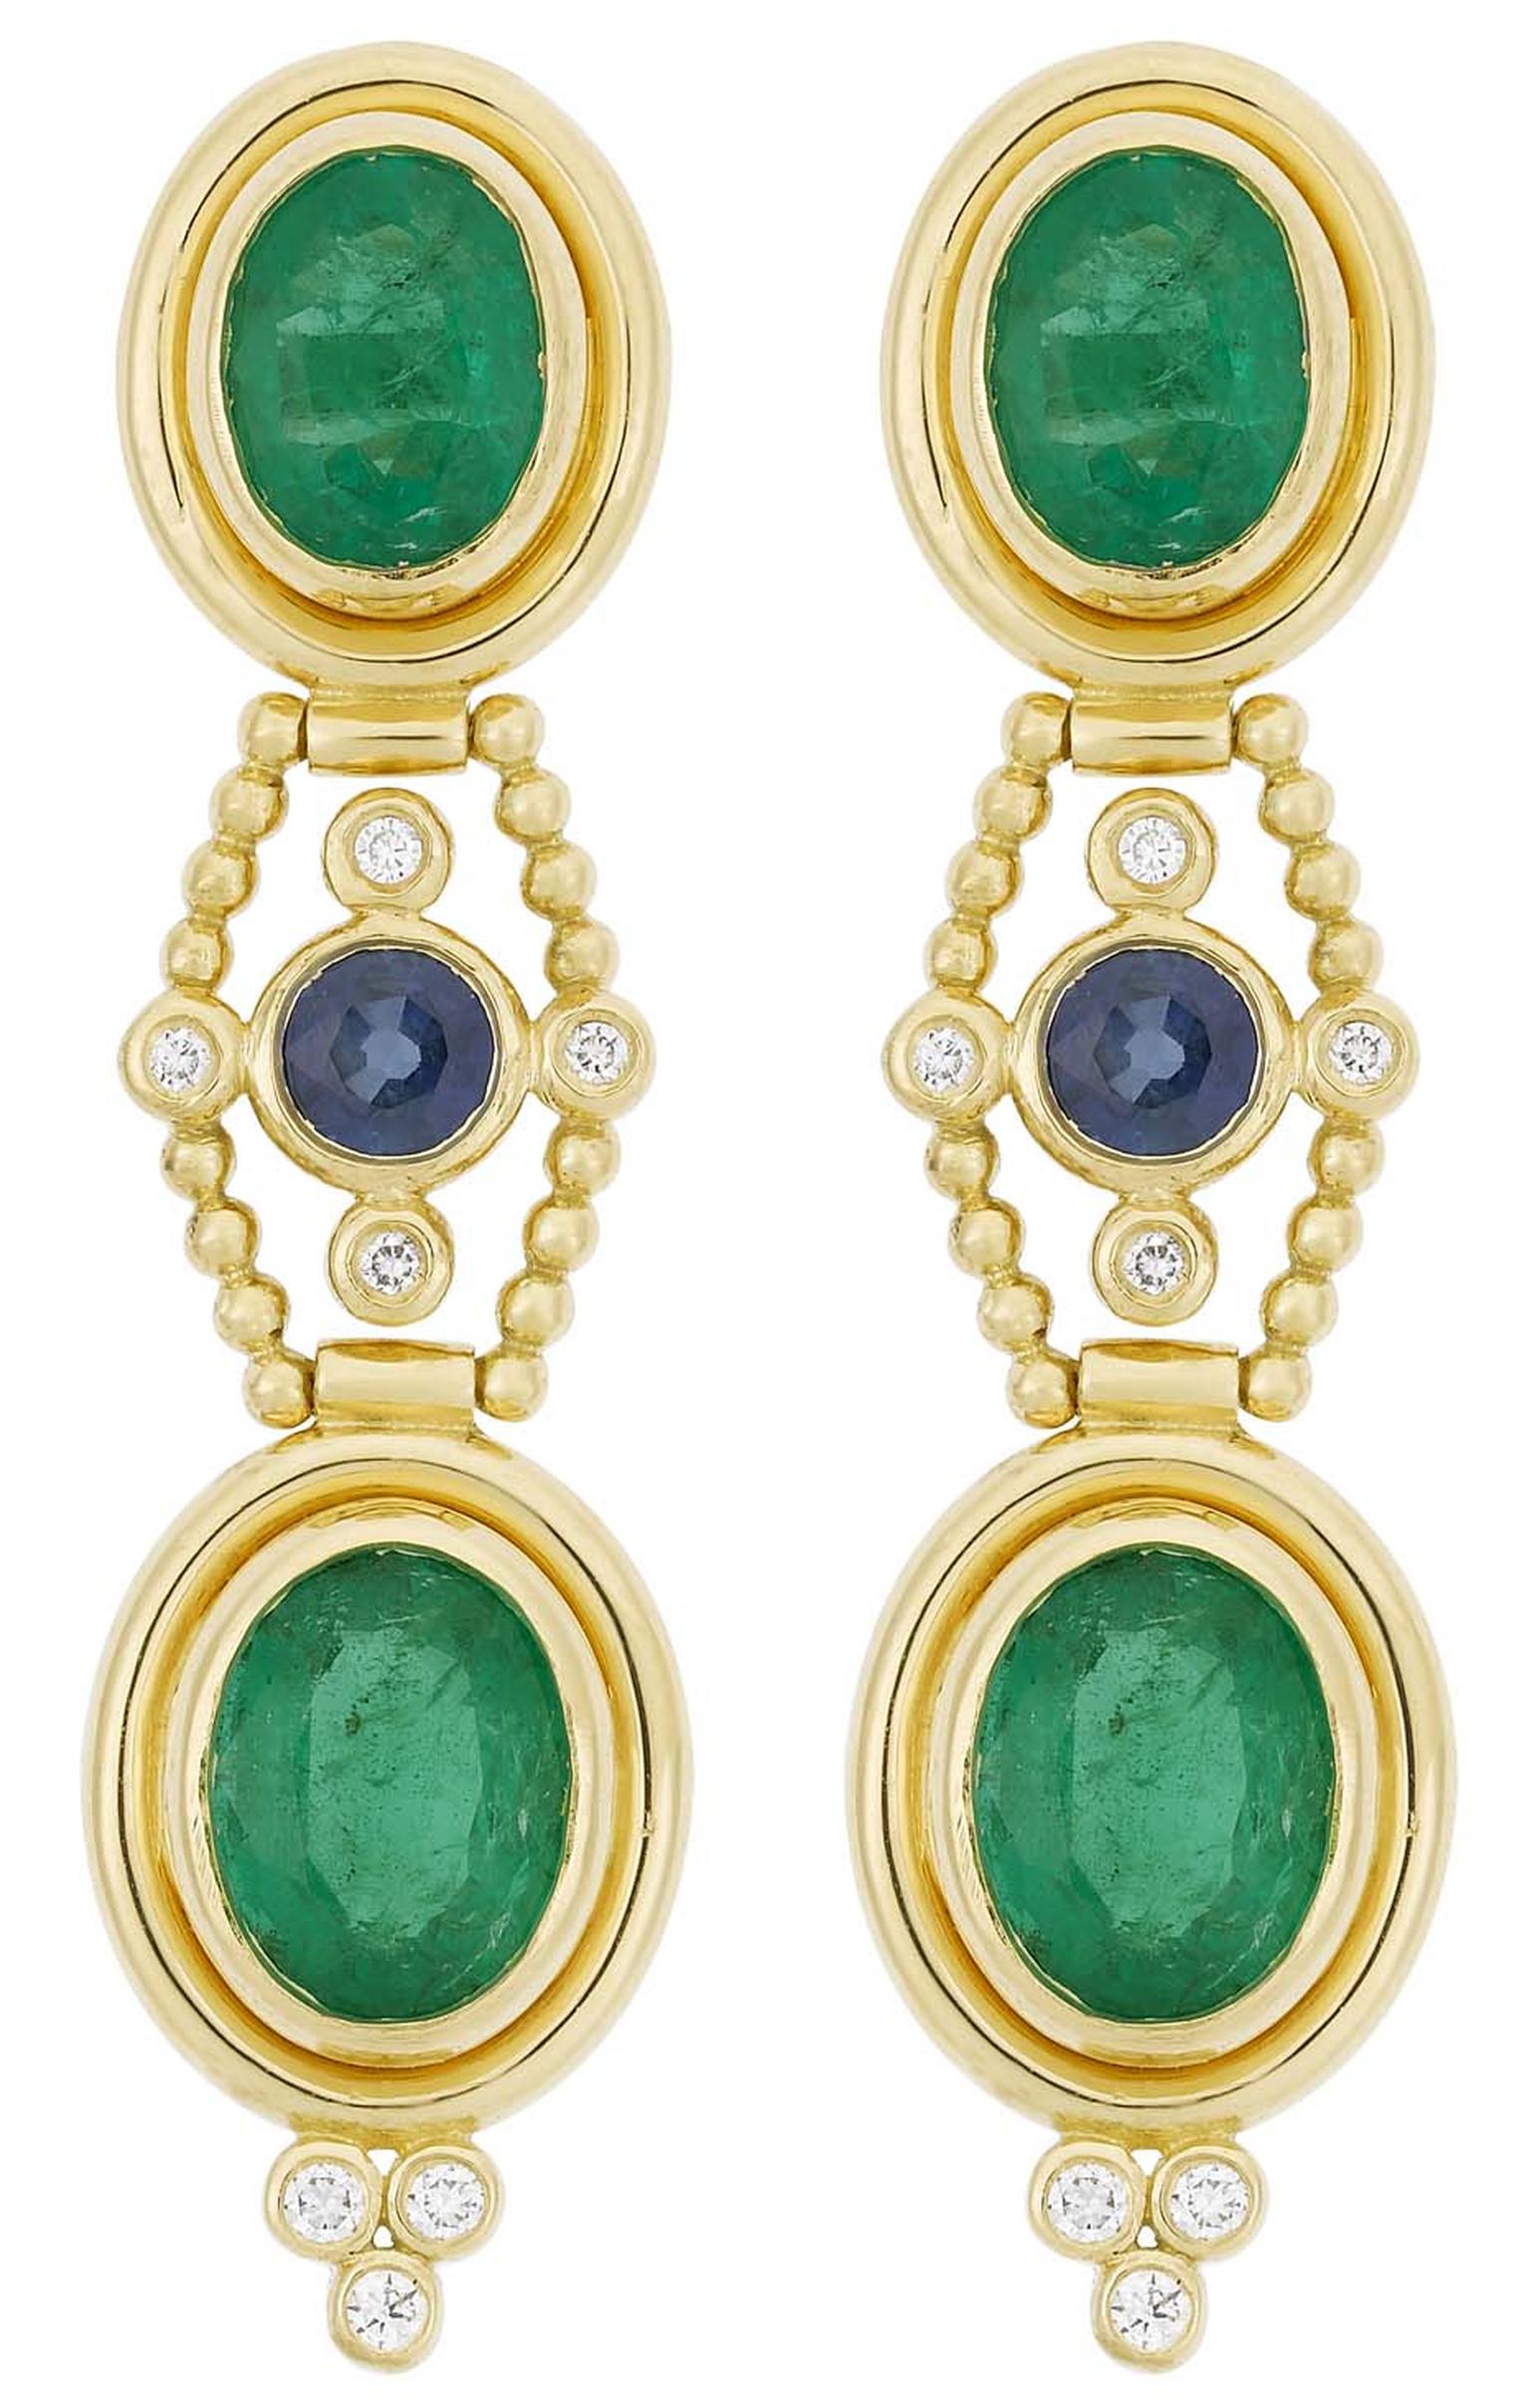 Temple St. Clair gold Theodora earrings with emerald, sapphire, and diamond earrings